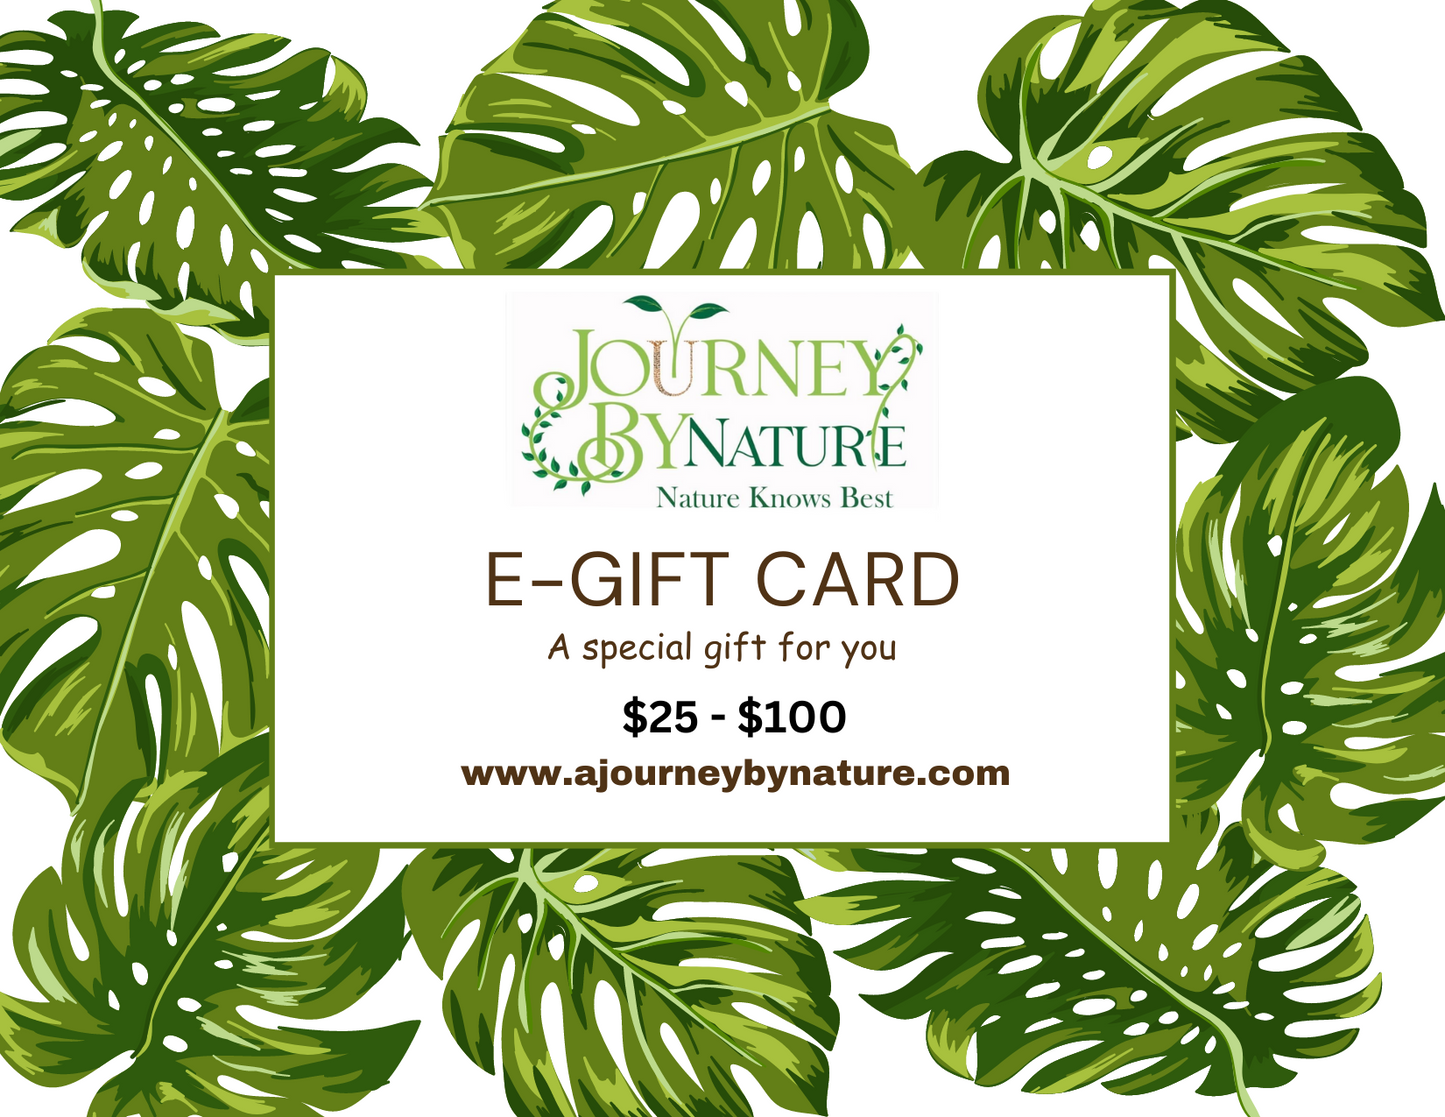 Journey By Nature E-Gift Card $25 - $100